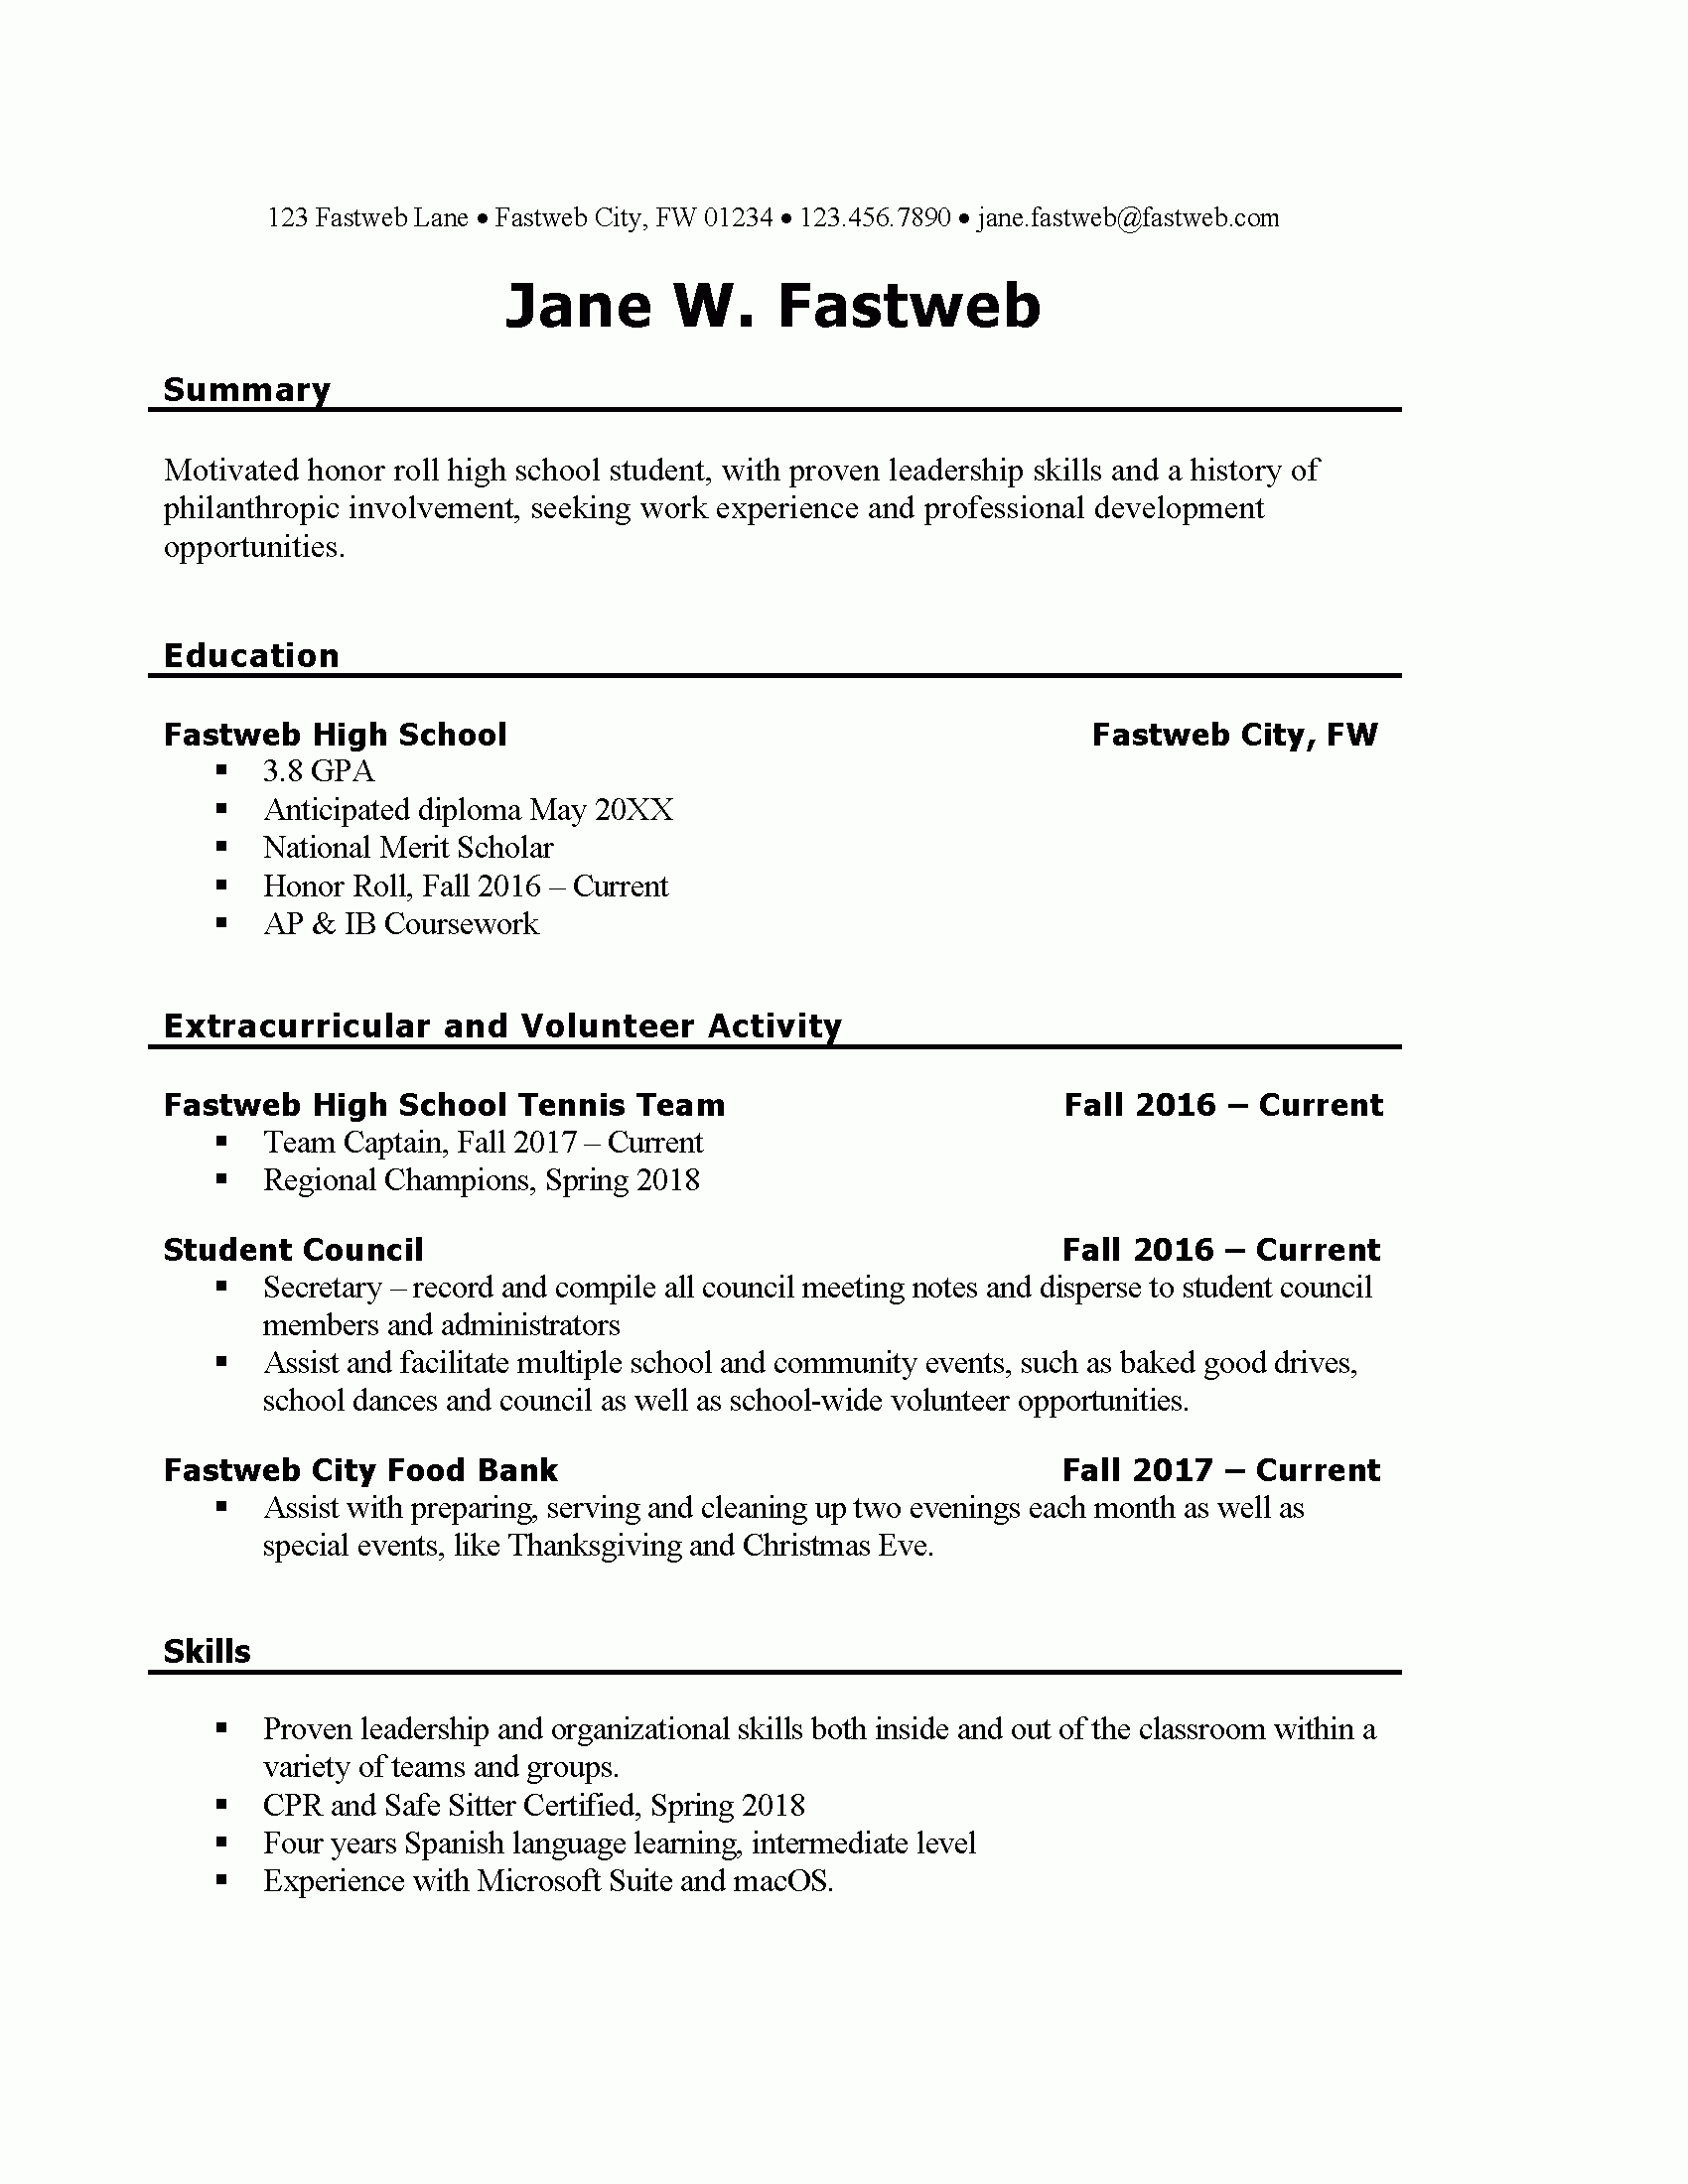 First Time Job Resume Templates - Zohre.horizonconsulting.co For First Time Resume Templates